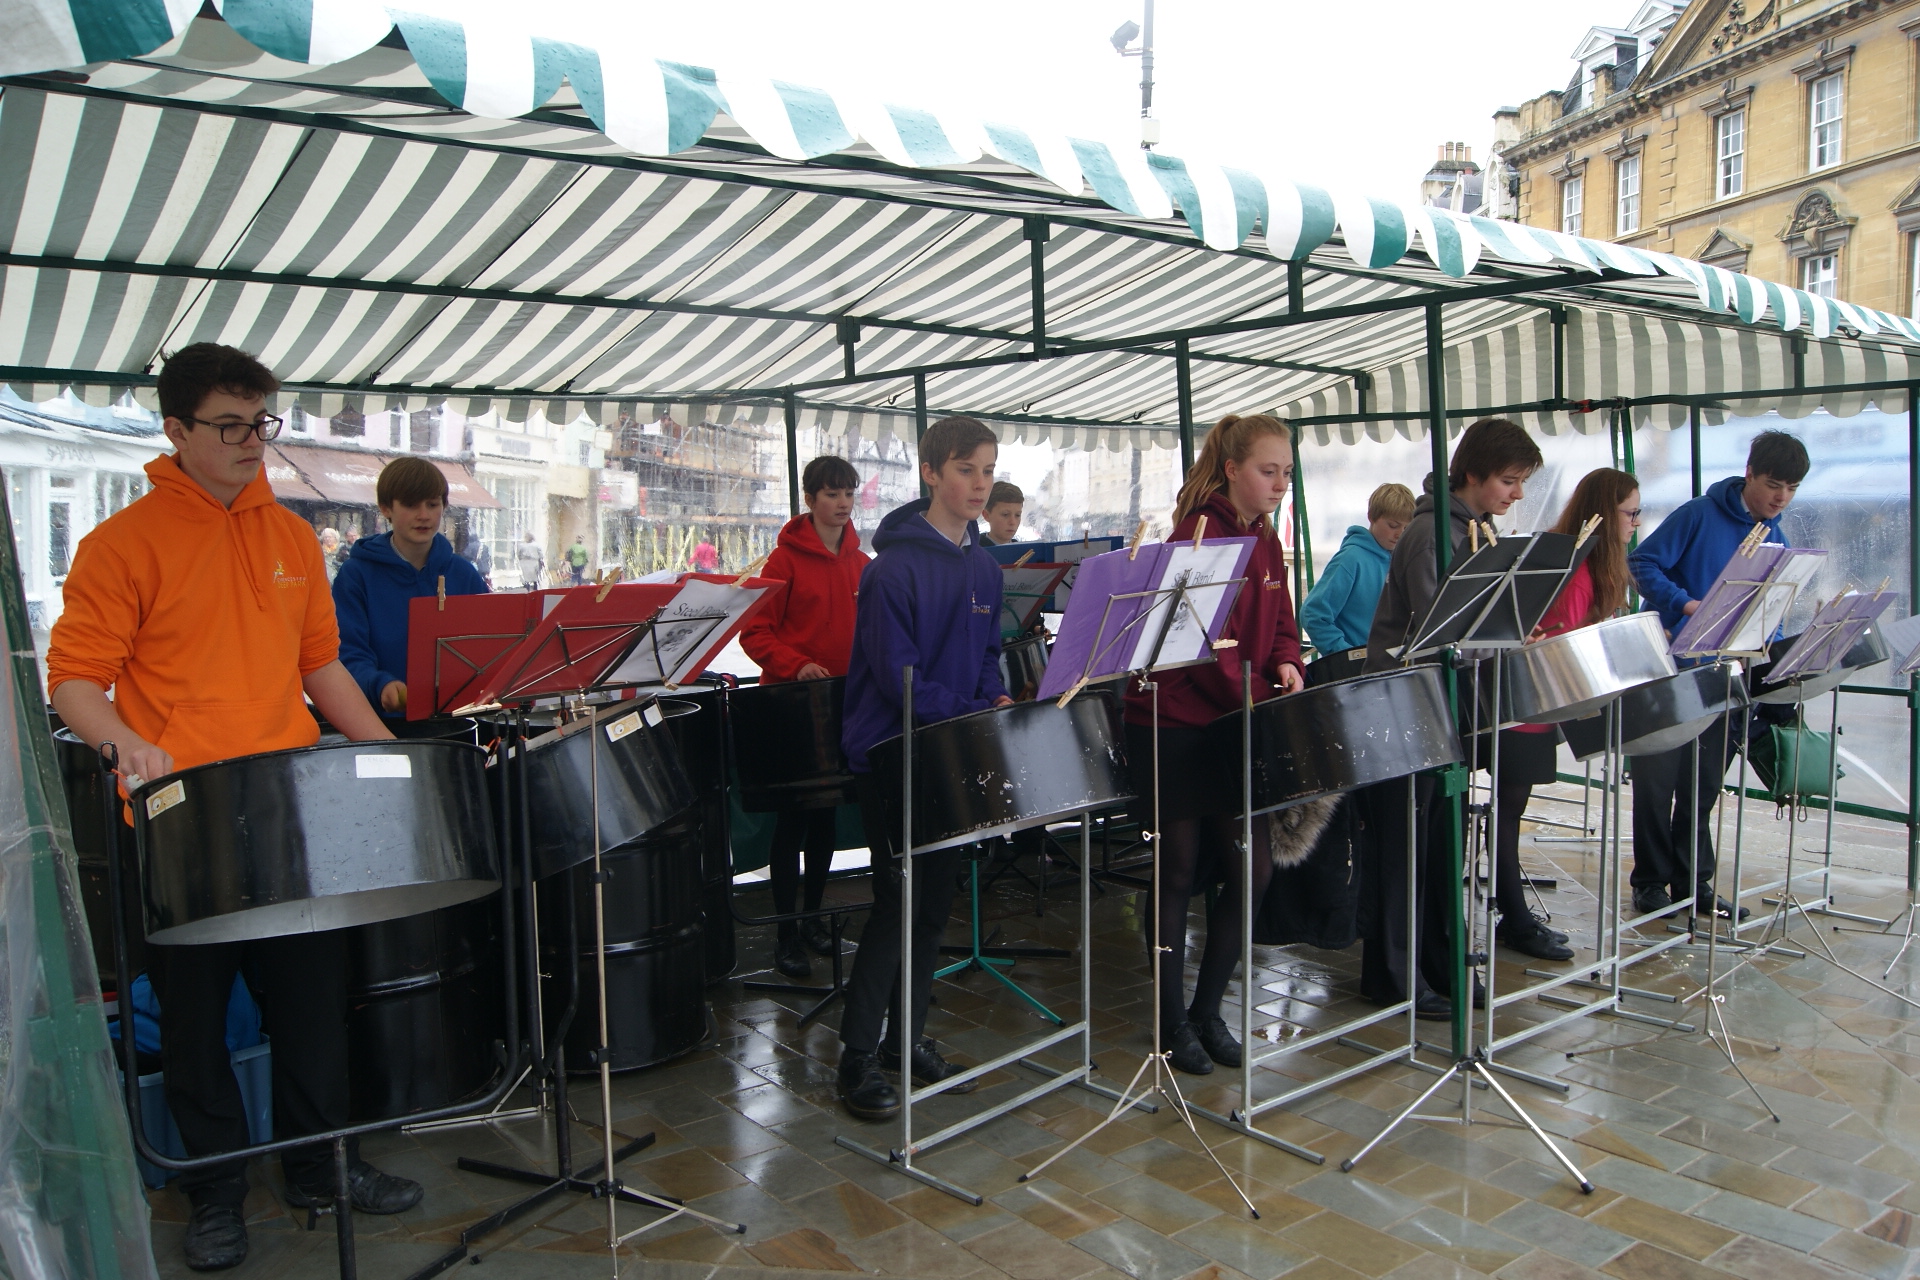 Youth Market March 2017 Steel Band